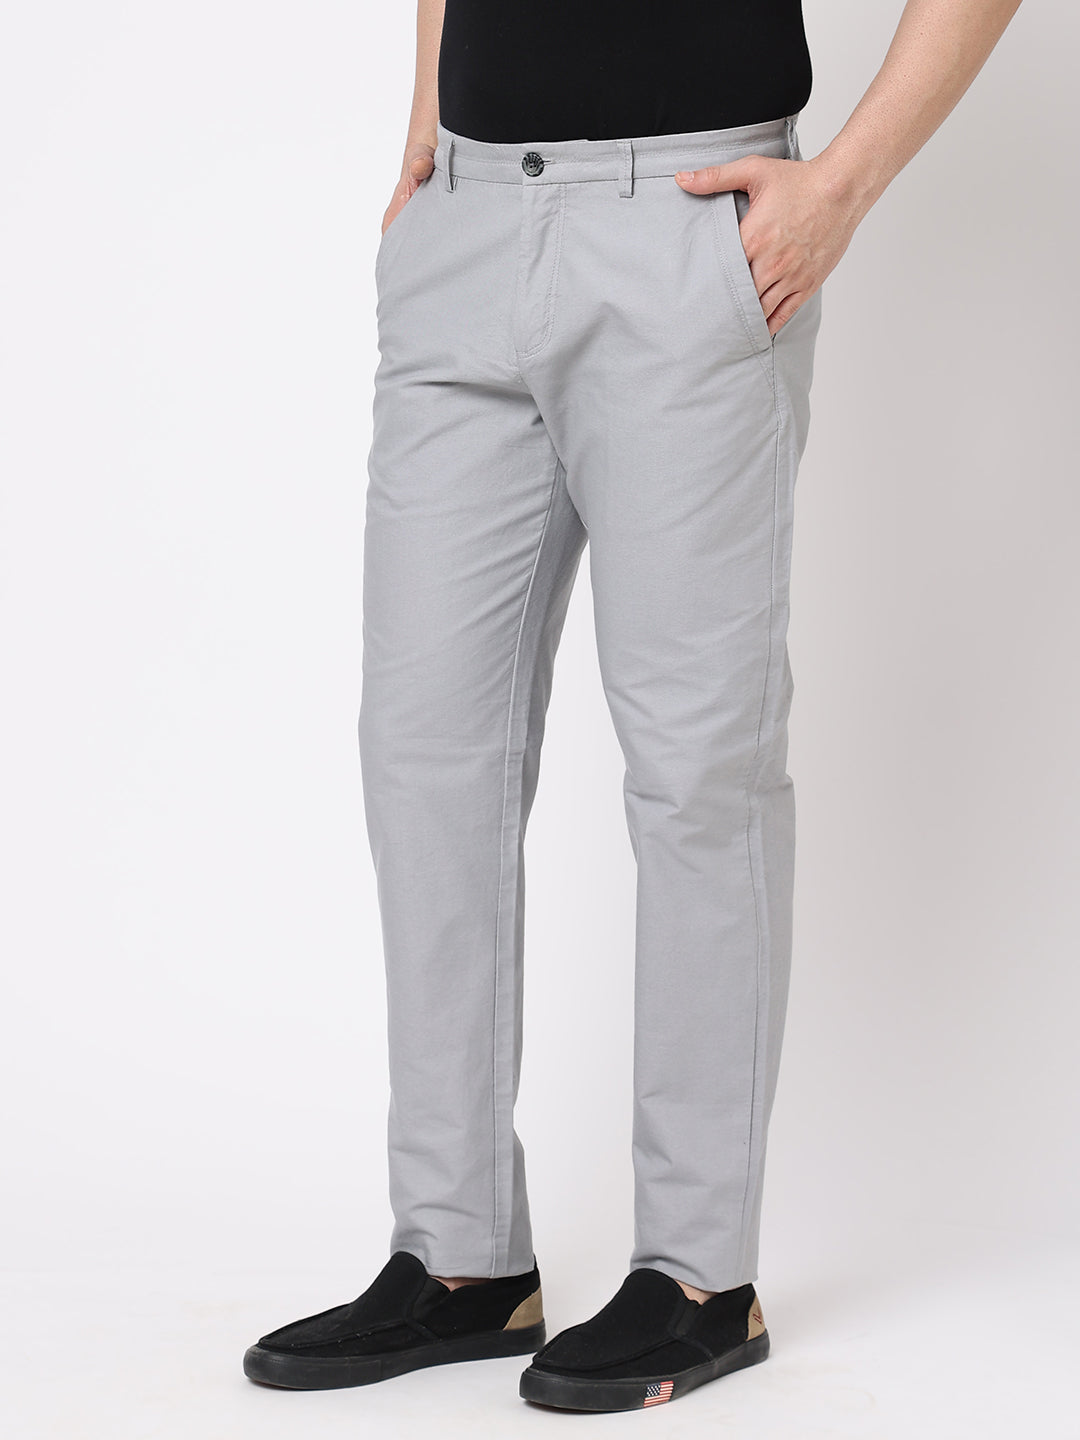 Solid Men''s Cotton Pant, Slim Fit at Rs 385 in Ludhiana | ID: 2851668661962